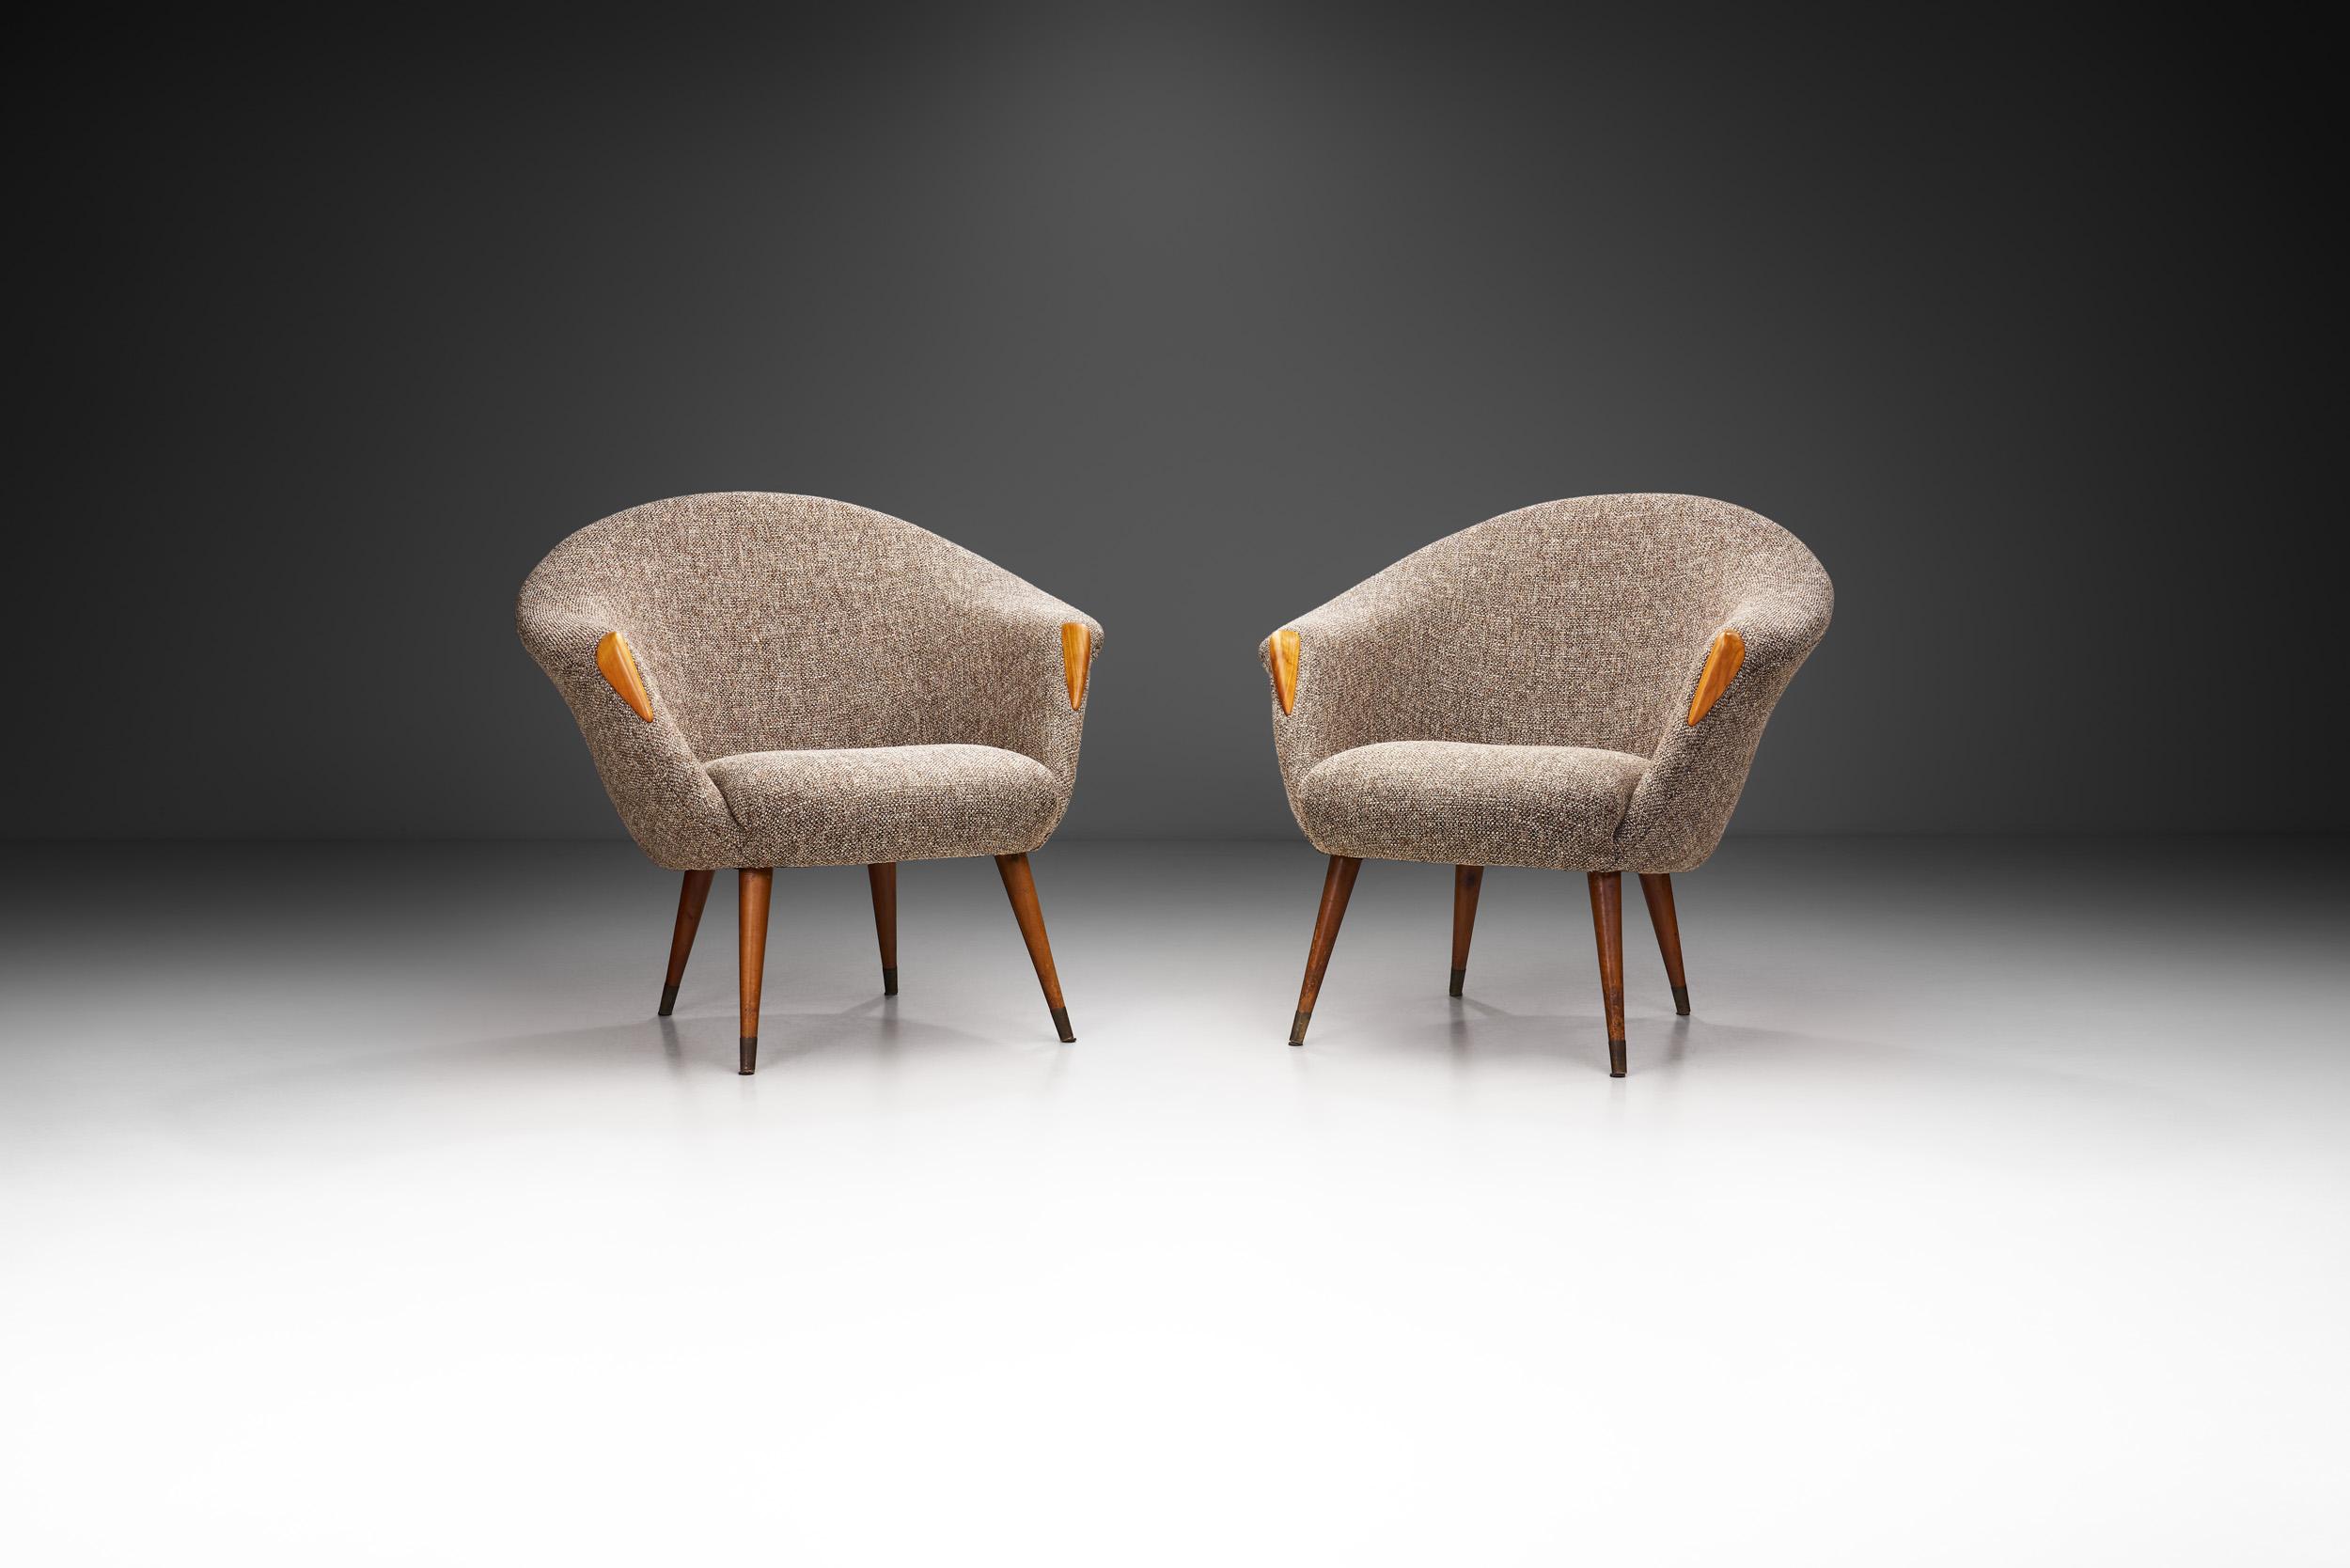 These chairs have a soft design edge that is immediately recognizable. These chairs have unmistakeable shell bodies where the back cascades down to form the armrests. While the armrests sit low and curve outwards, therefore opening the seats, the